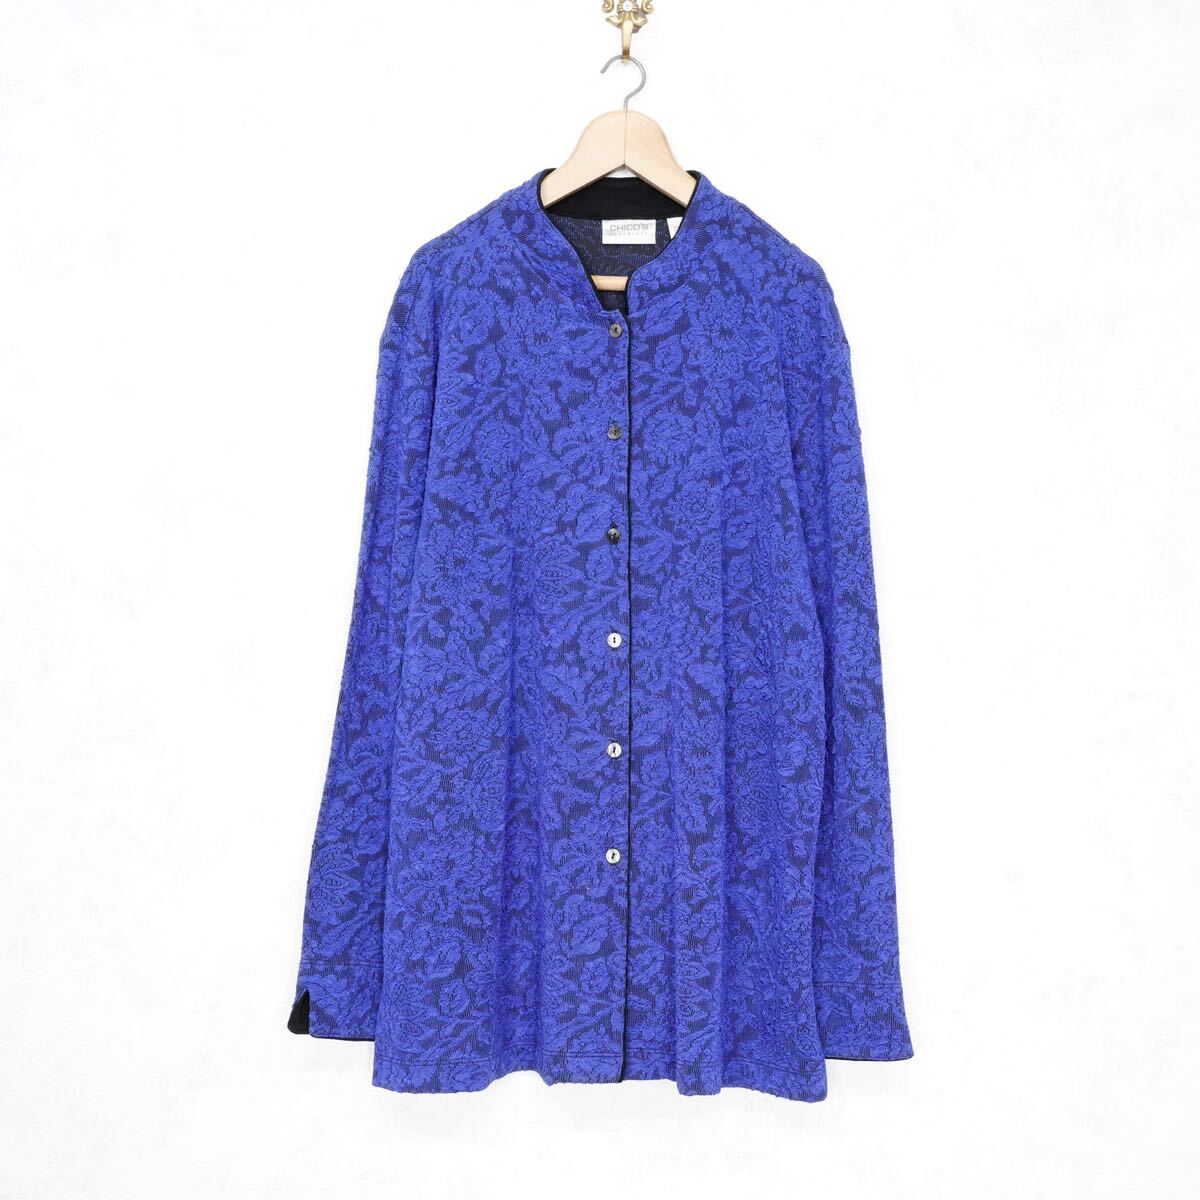 *SPECIAL ITEM* USA VINTAGE CHICO'S LACE EMBROIDERY DESIGN SHIRT JACKET/アメリカ古着レース刺繍デザインシャツジャケット_画像5